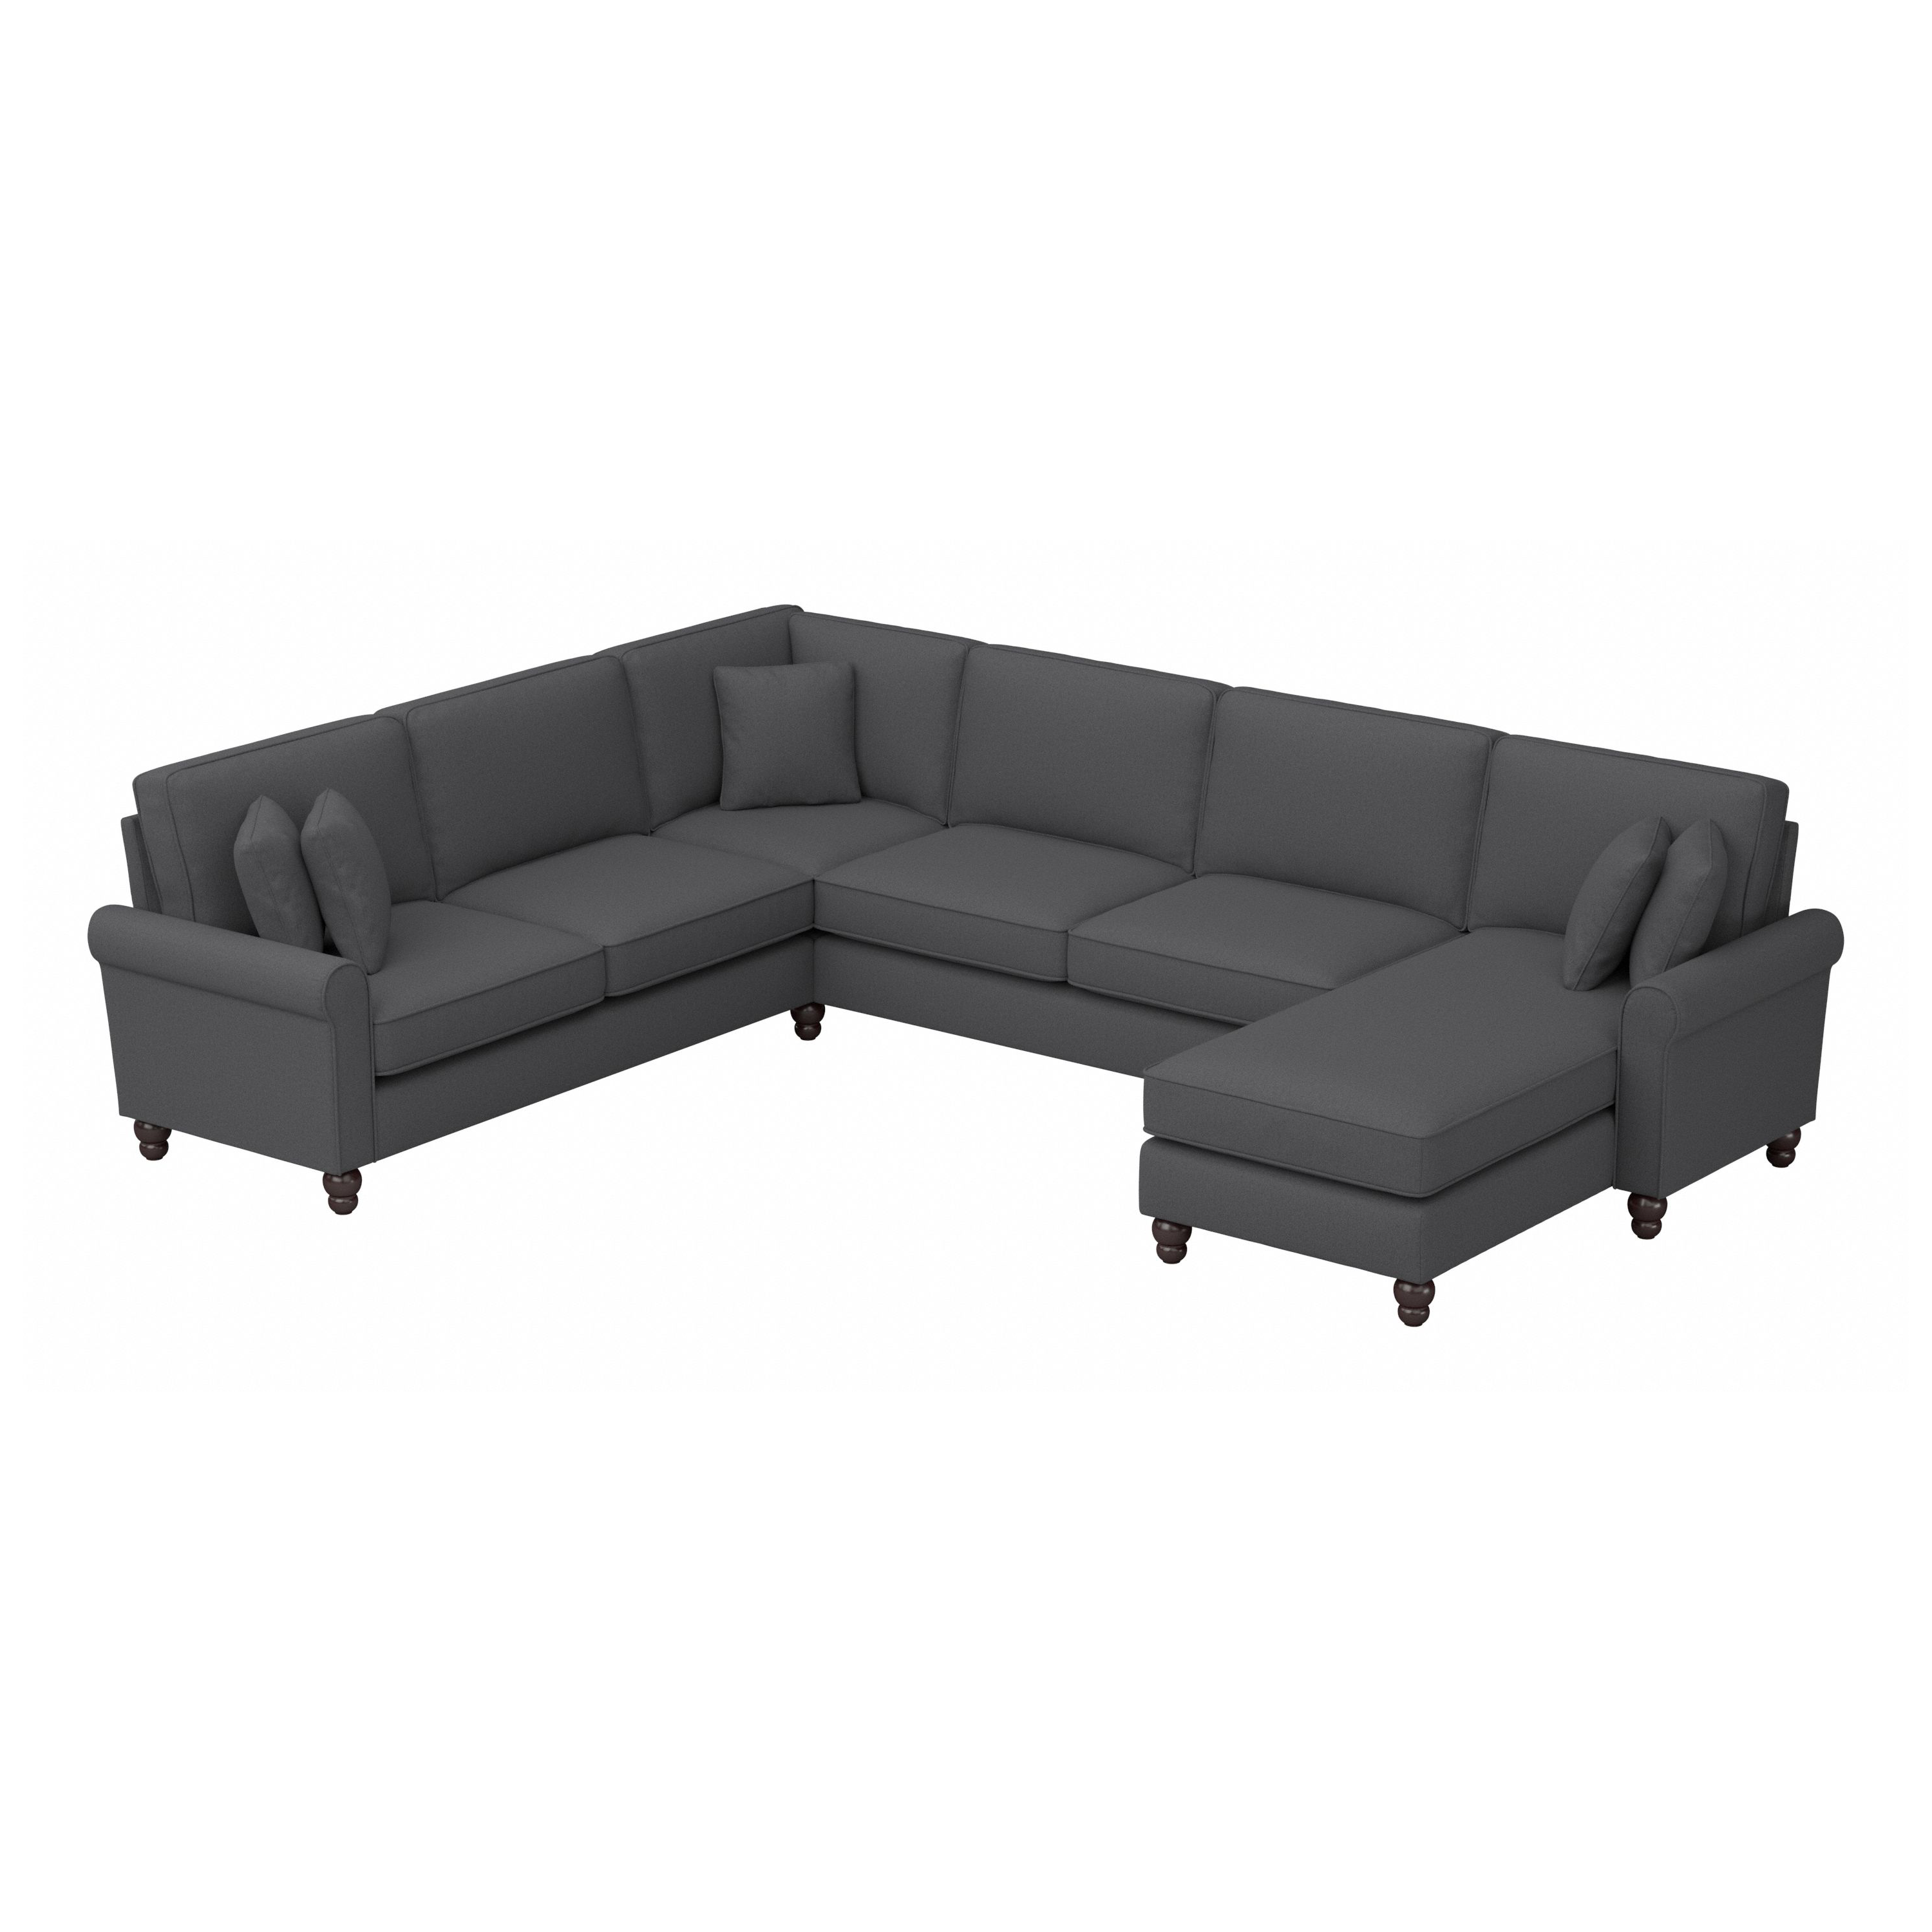 Shop Bush Furniture Hudson 128W U Shaped Sectional Couch with Reversible Chaise Lounge 02 HDY127BCGH-03K #color_charcoal gray herringbone fabr